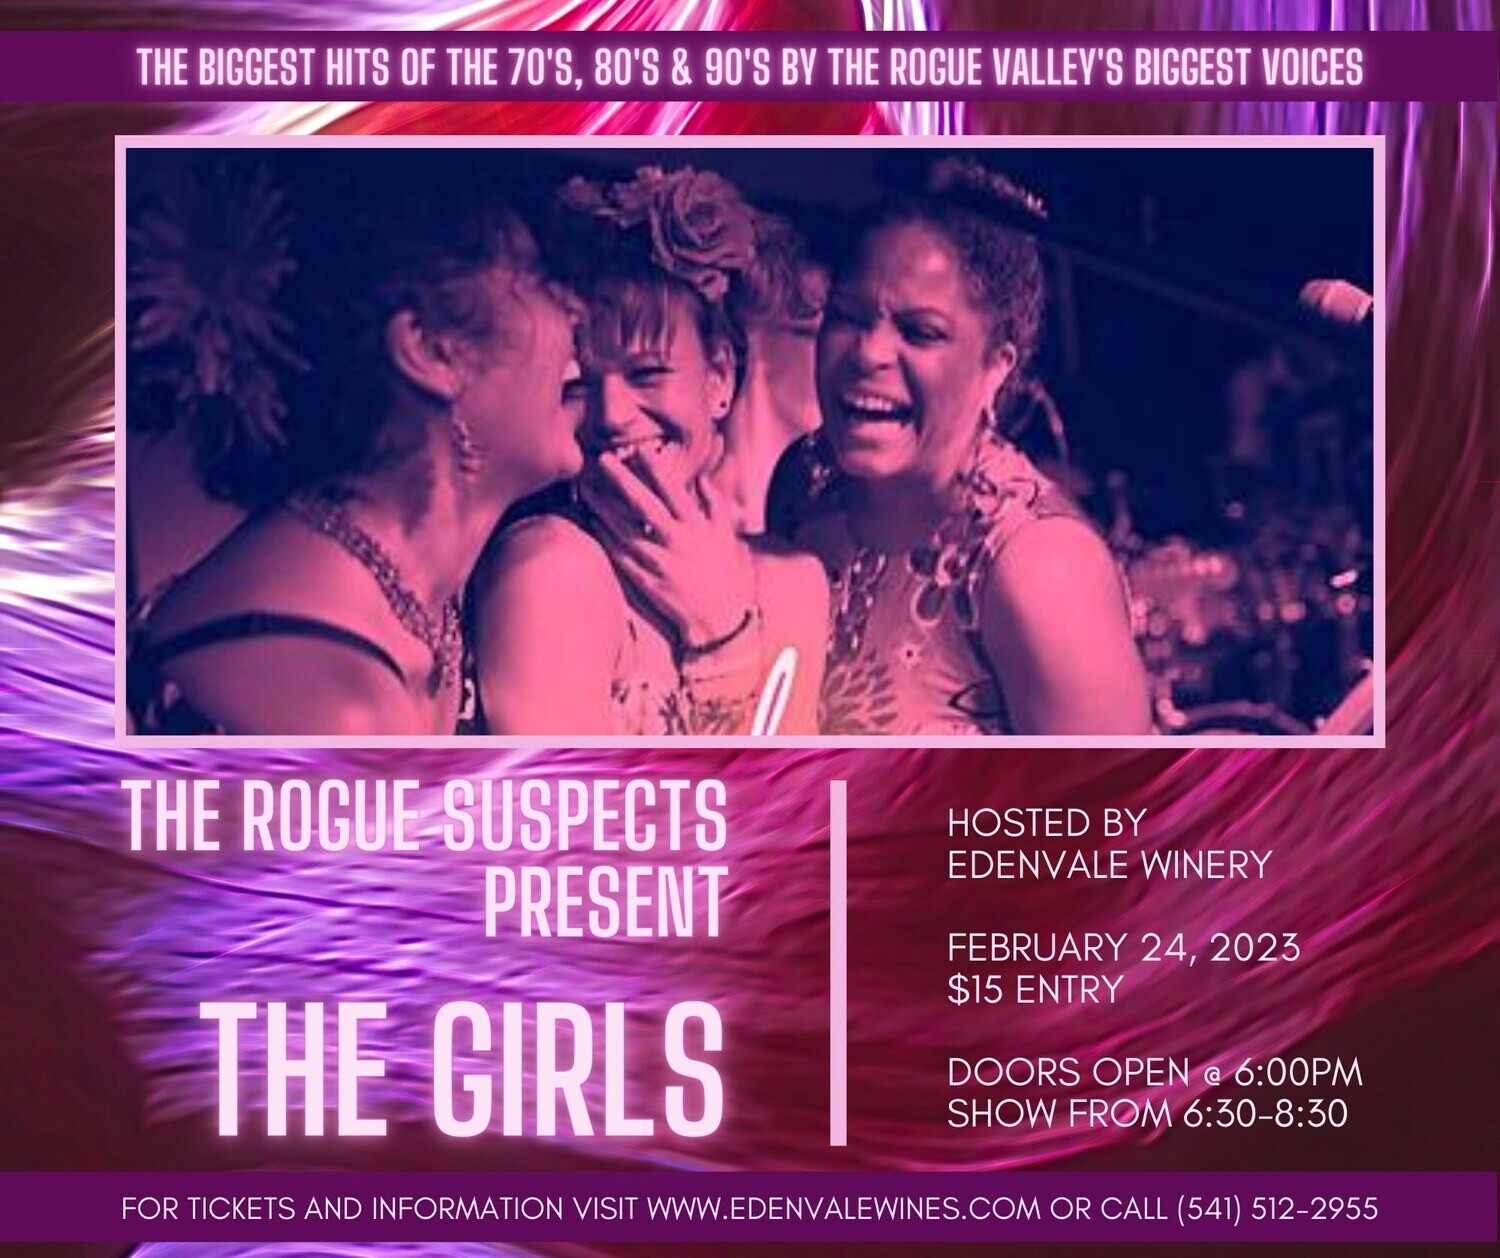 "The Girls"  At EdenVale Winery Presented by Rogue Suspects